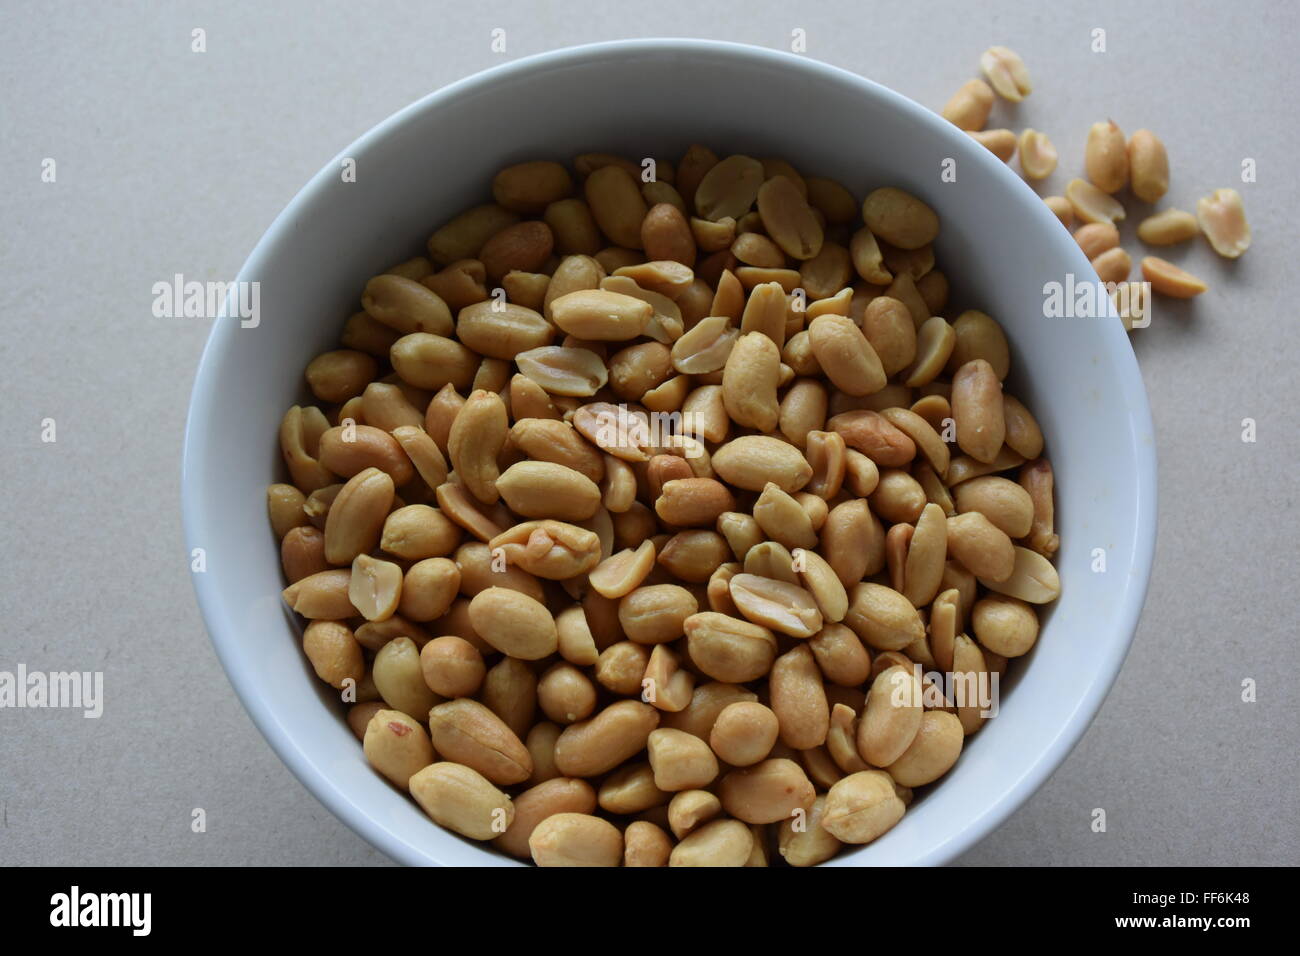 a lot of peanuts in a dish Stock Photo